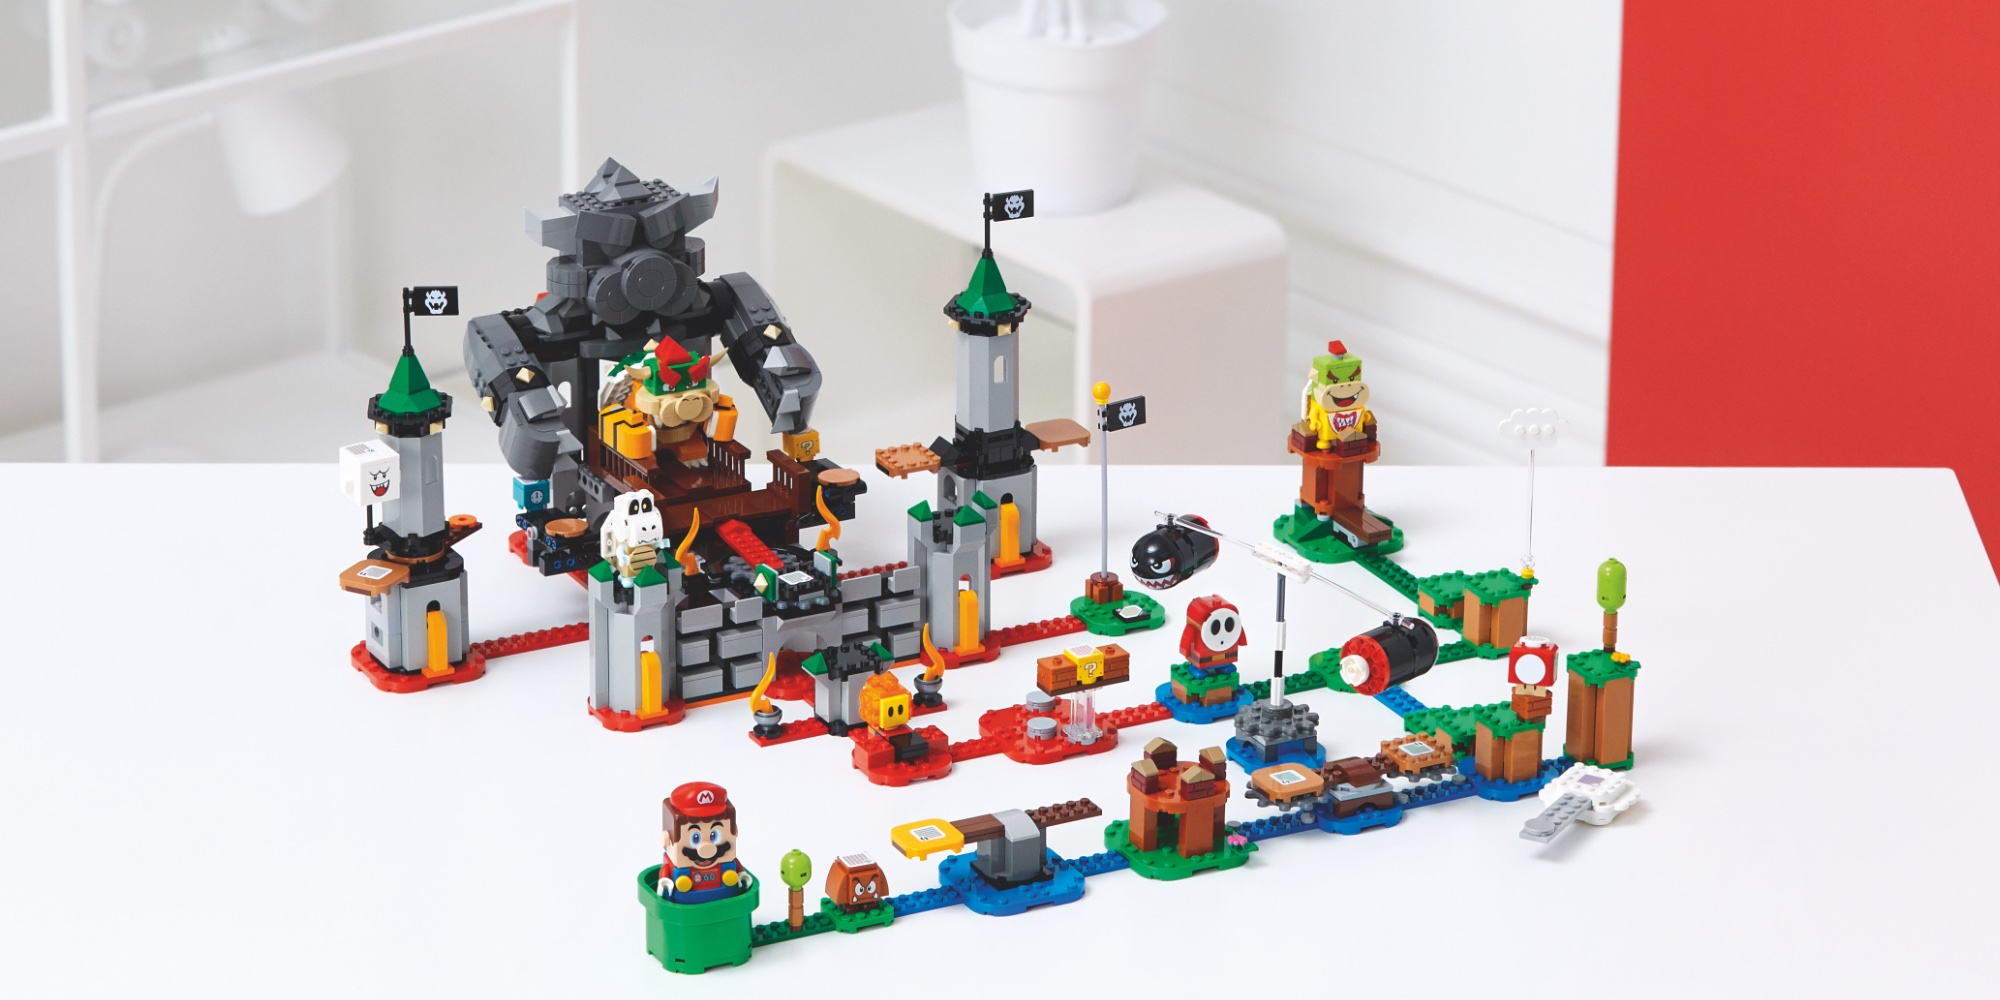 Lego Mario Expansion Sets Add Nine New Builds To The Theme 9to5toys